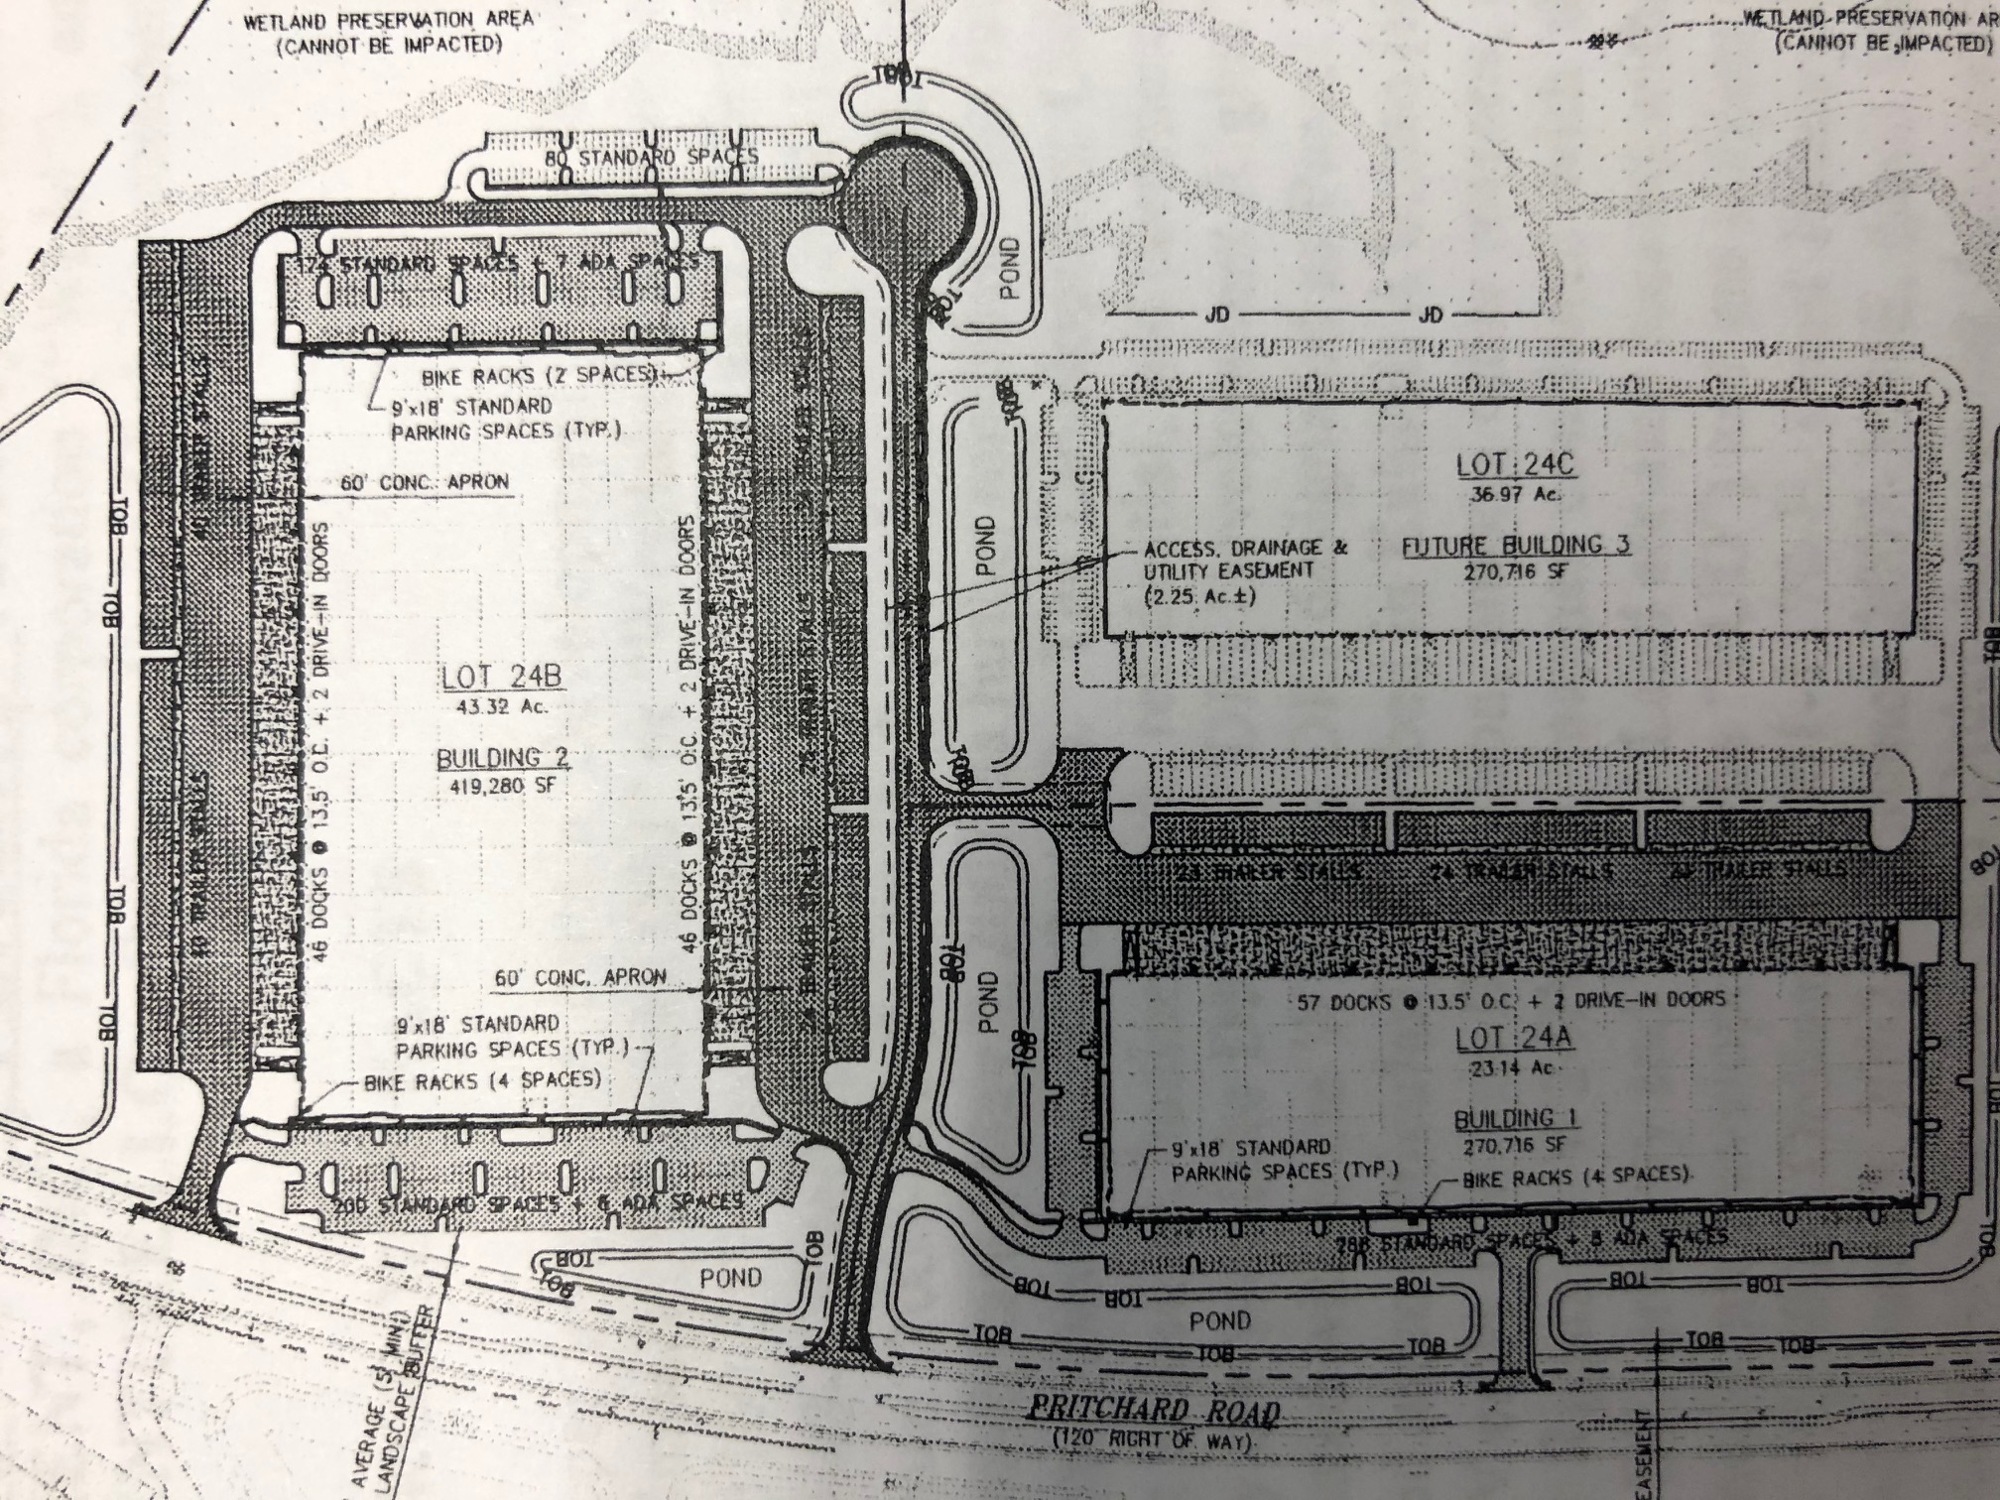 A site plan for Becknell Industrial’s proposed warehouse center on Lot 24 in Westlake.